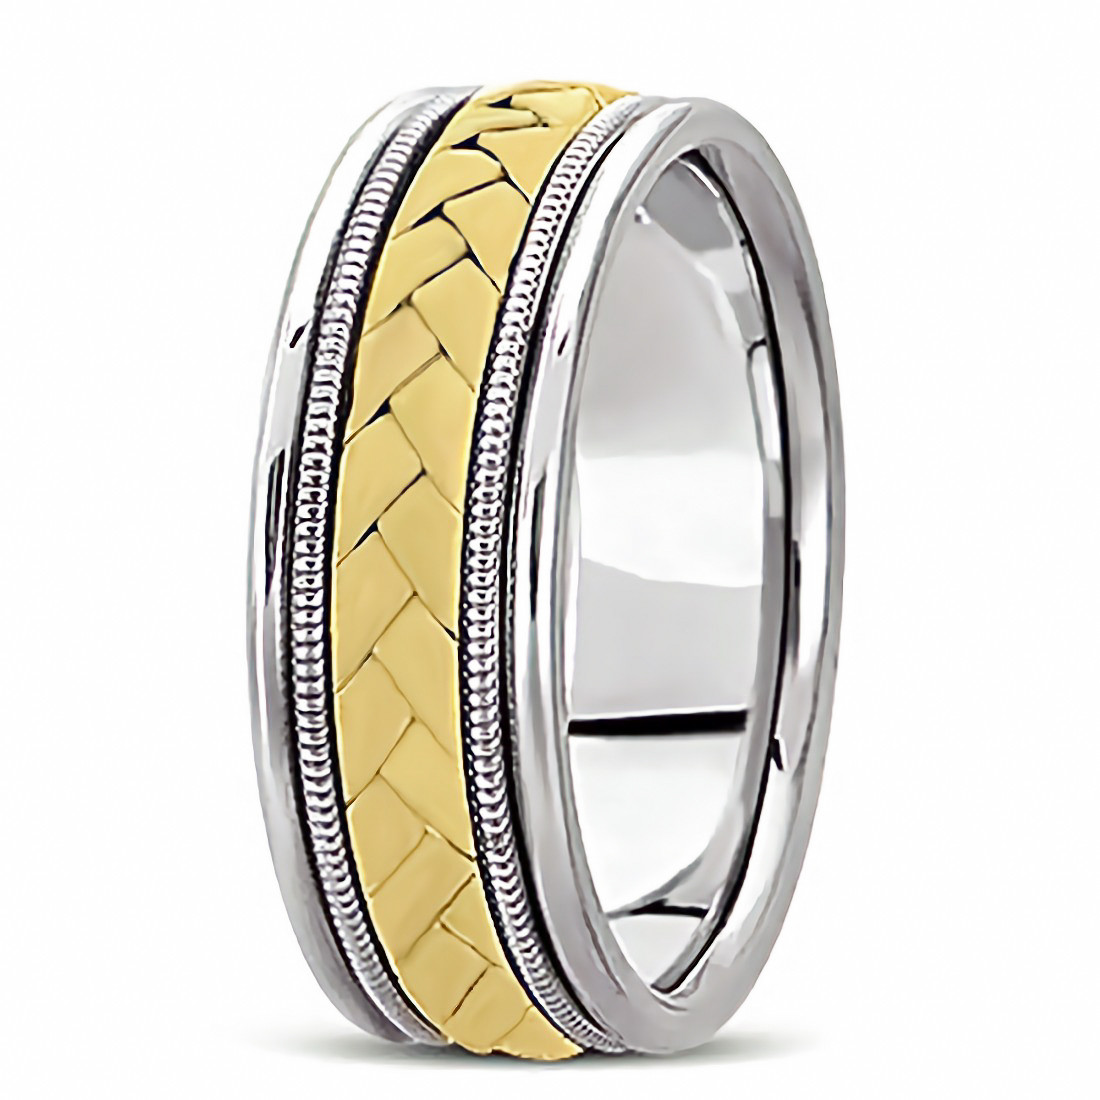 Woven Braided Wedding Band Ring 14k Two Tone Gold